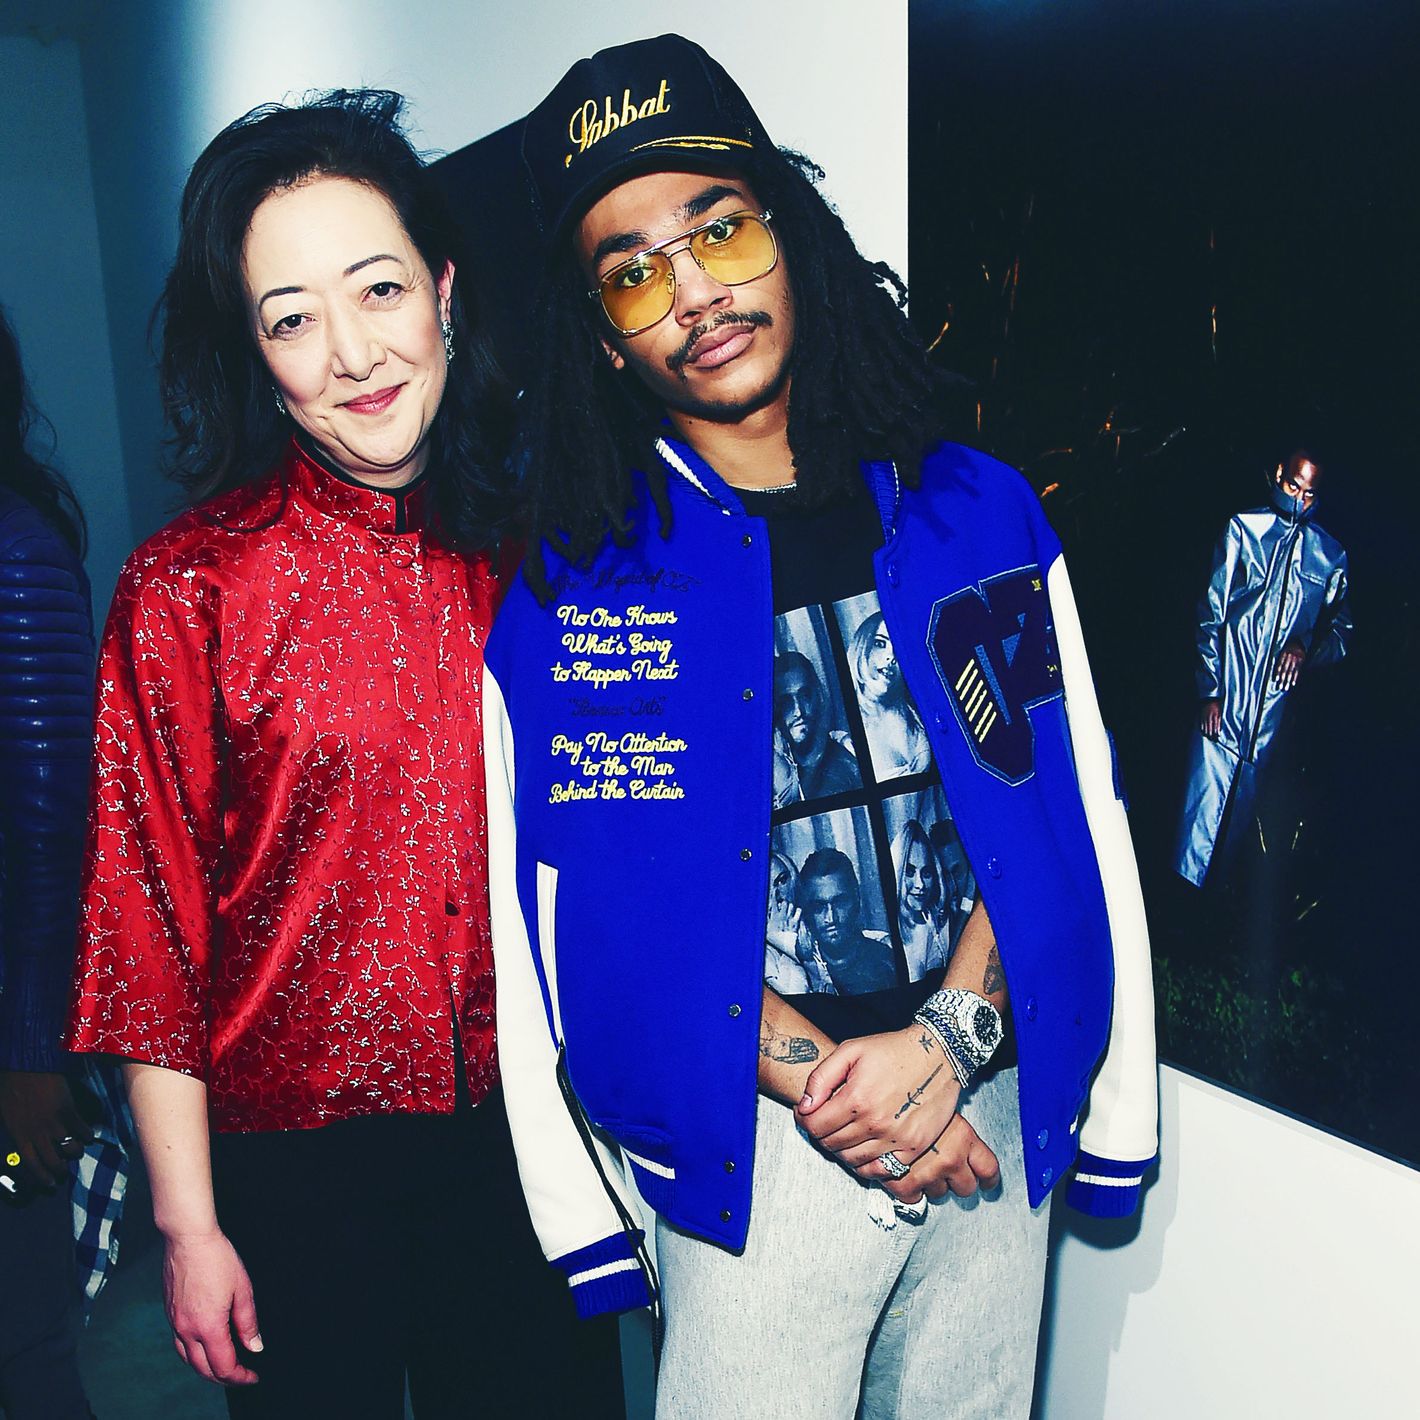 Luka Sabbat wearing The North Face jacket is seen outside Sacai on